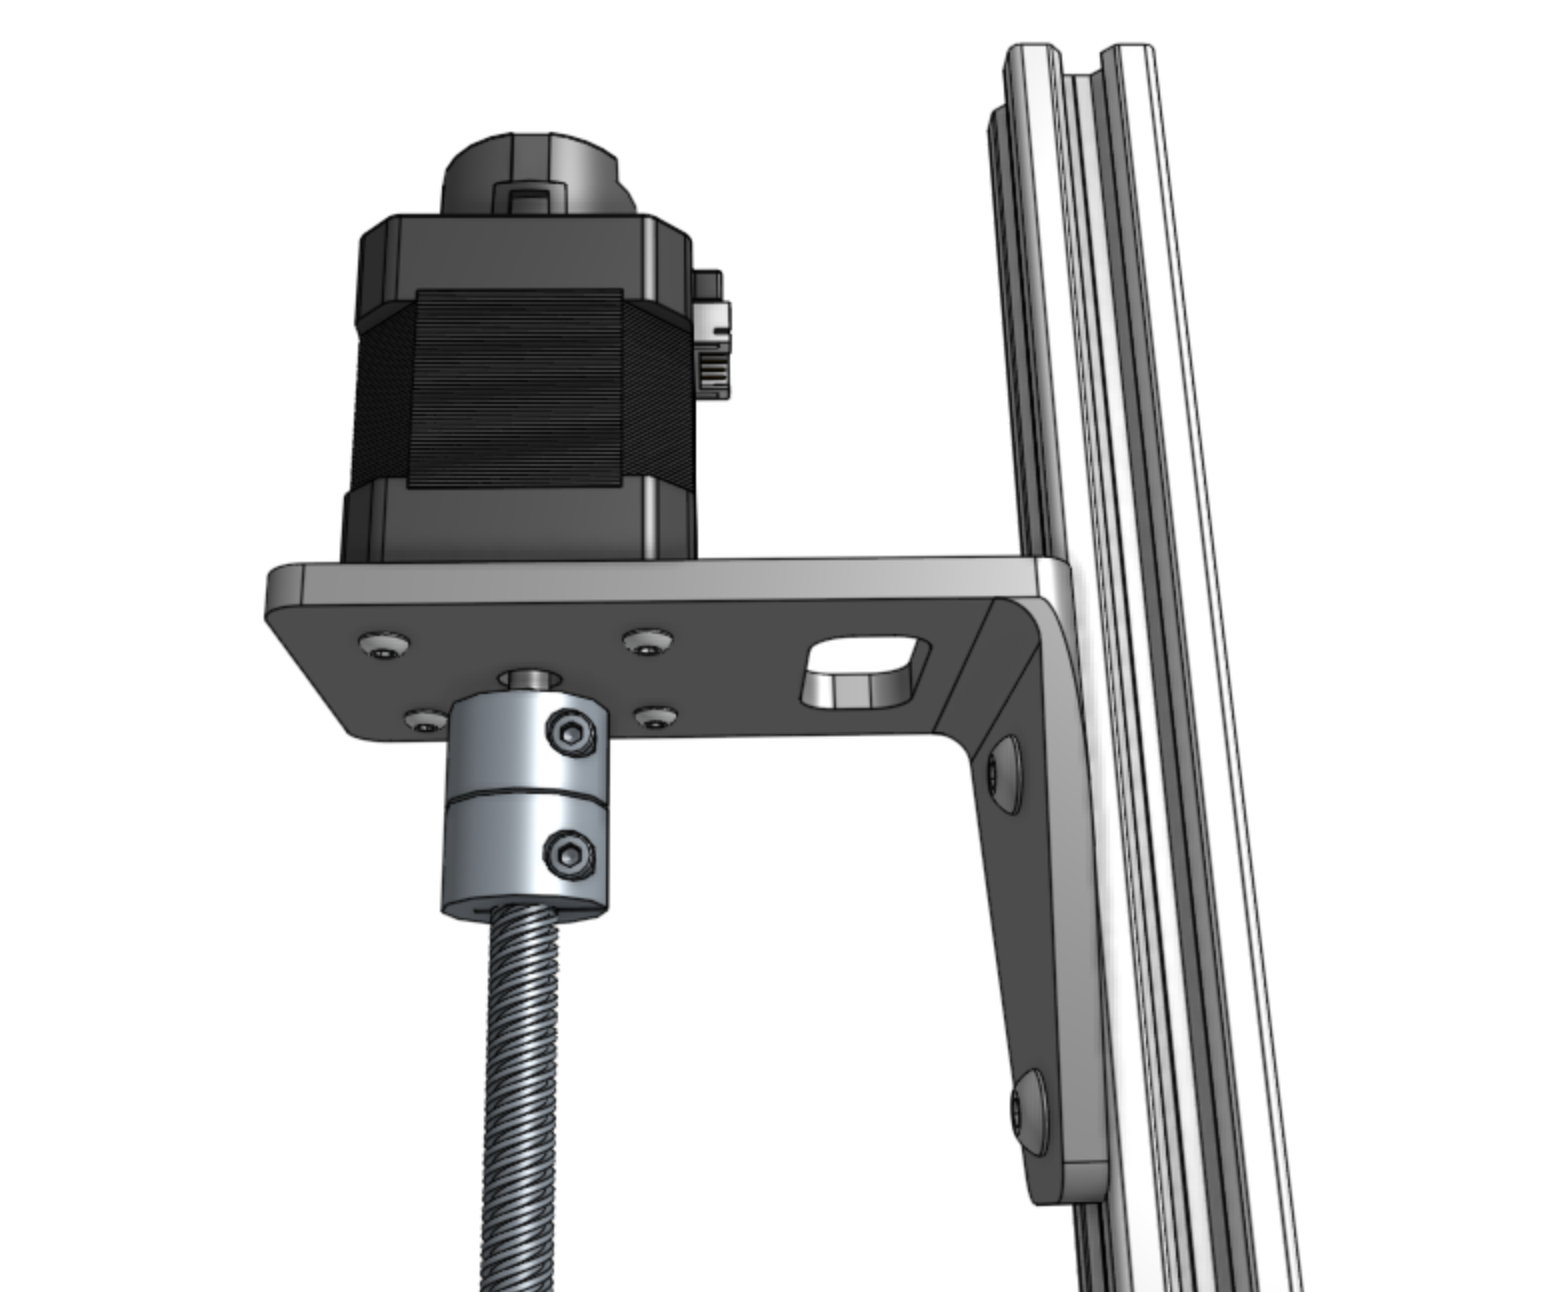 z-axis motor and leadscrew connection